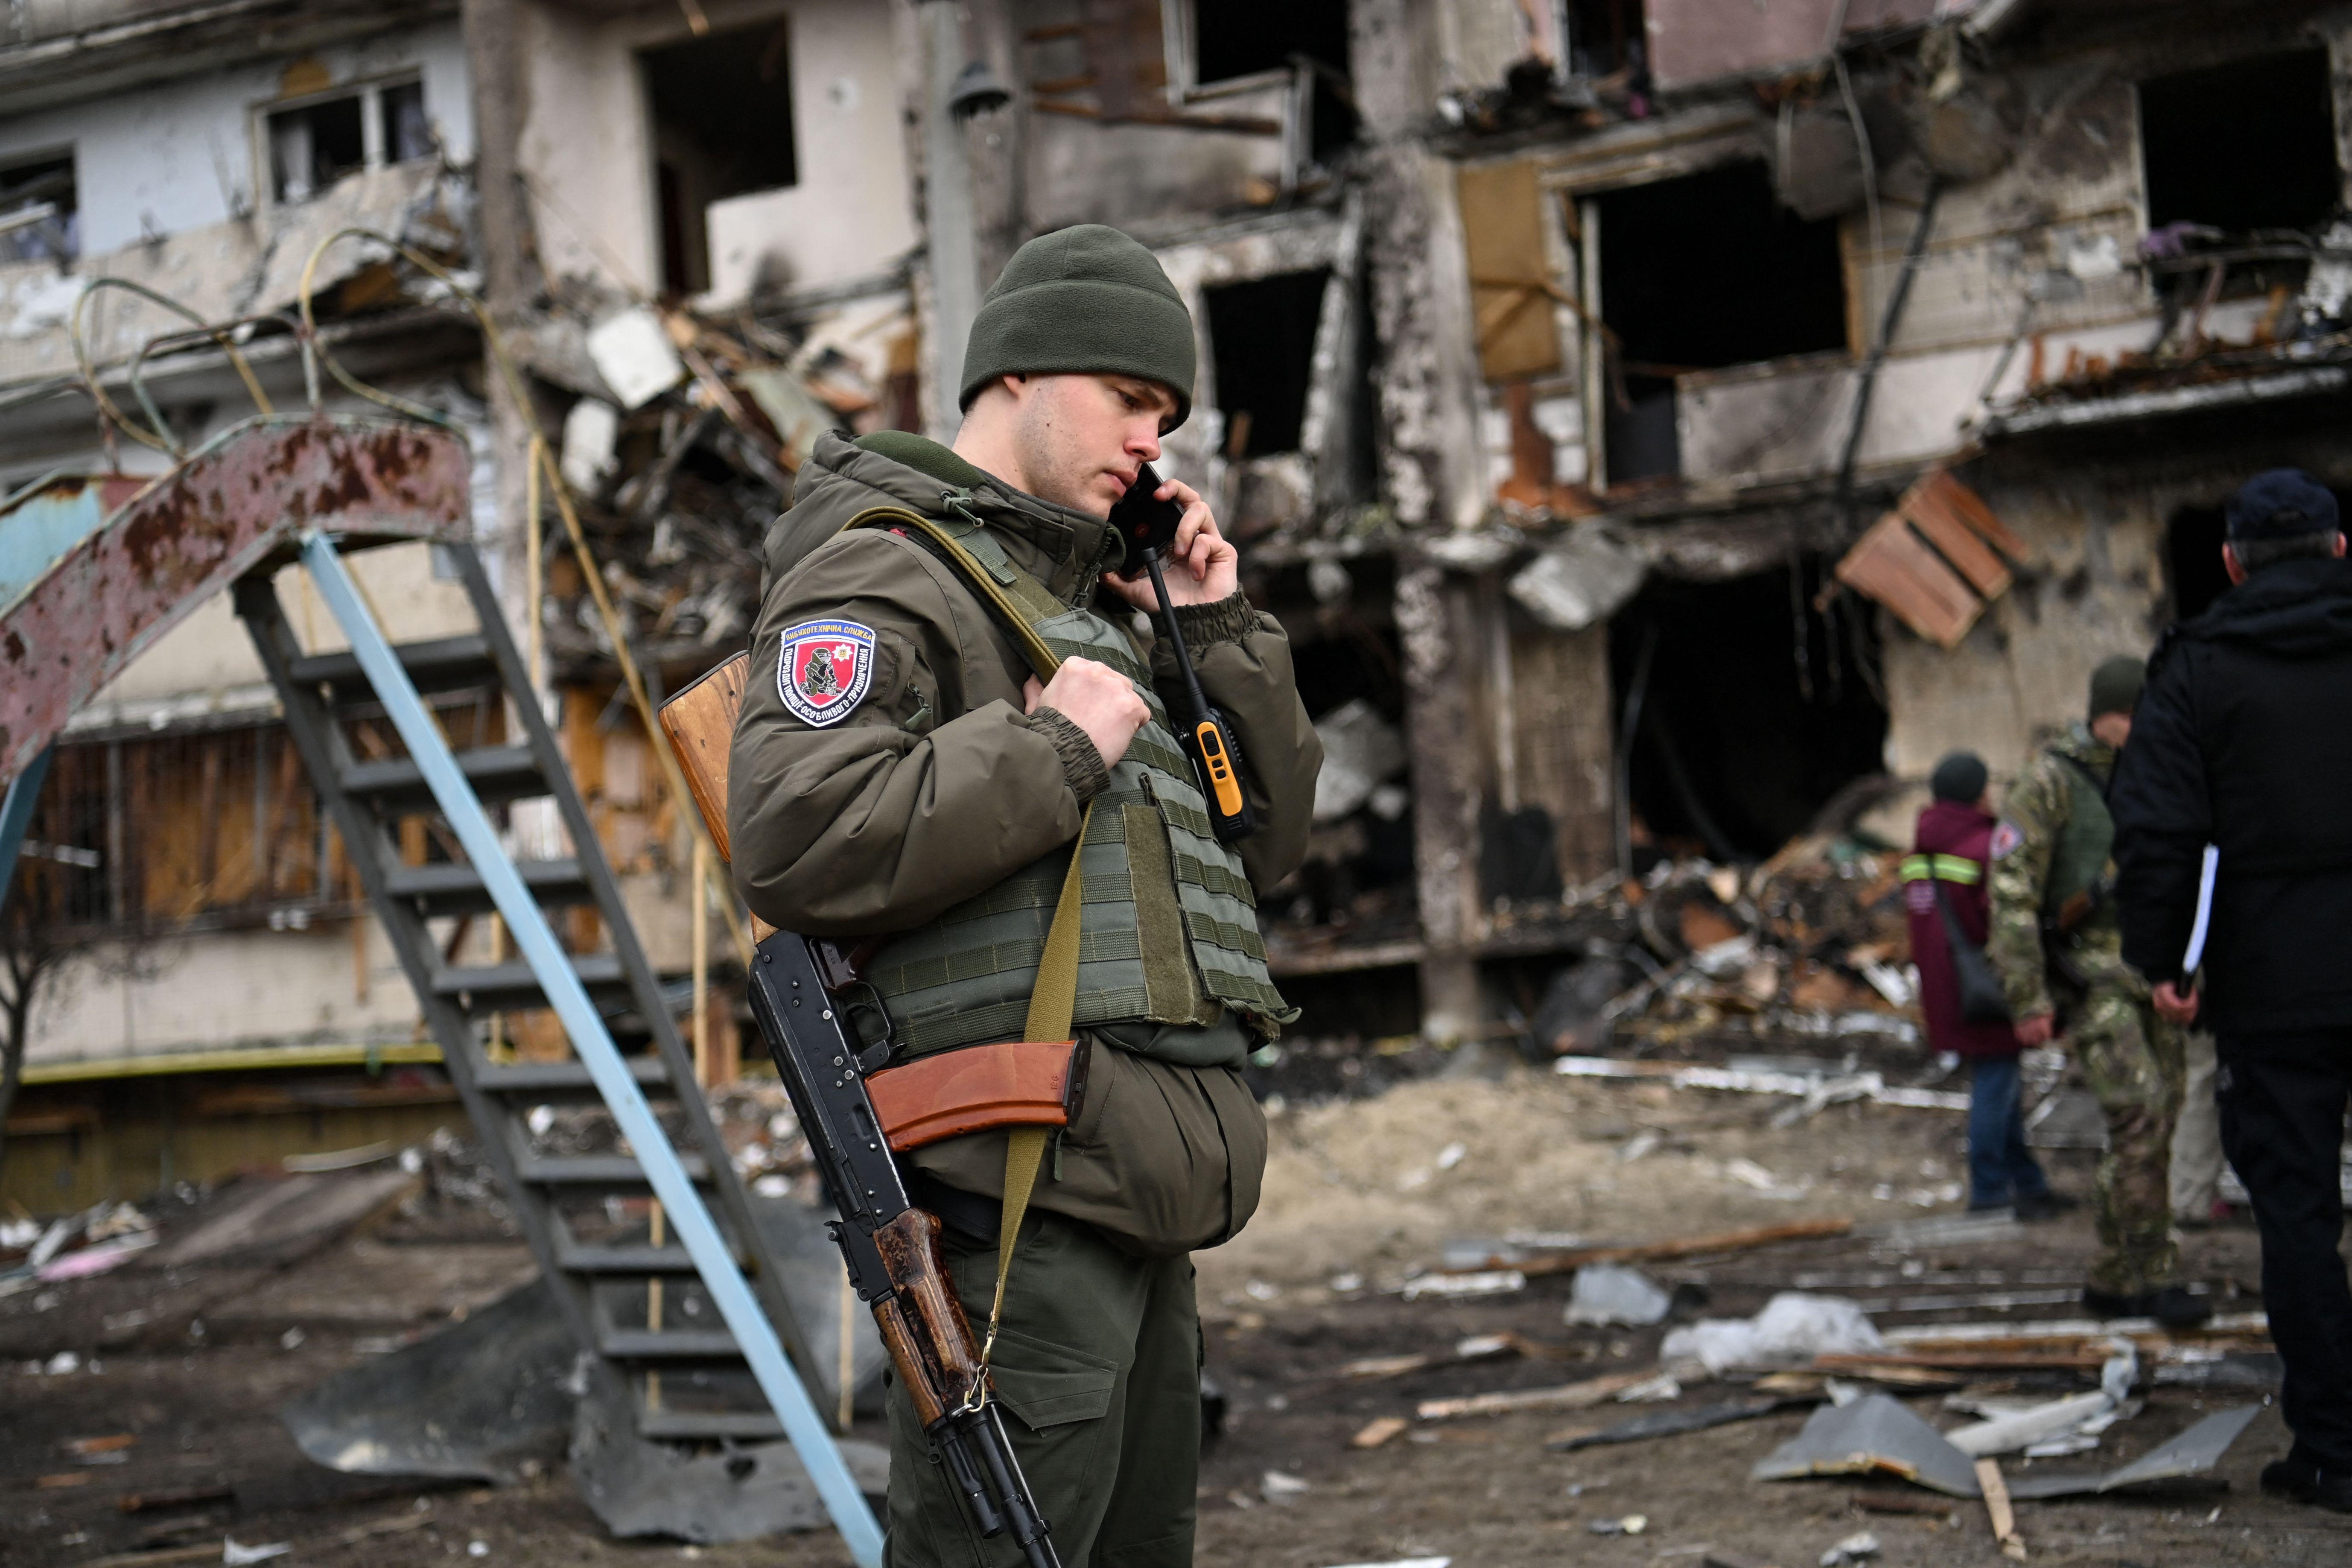 A man in uniform on the phone, his hand resting on the strap of his gun, in front of ruined buildings.